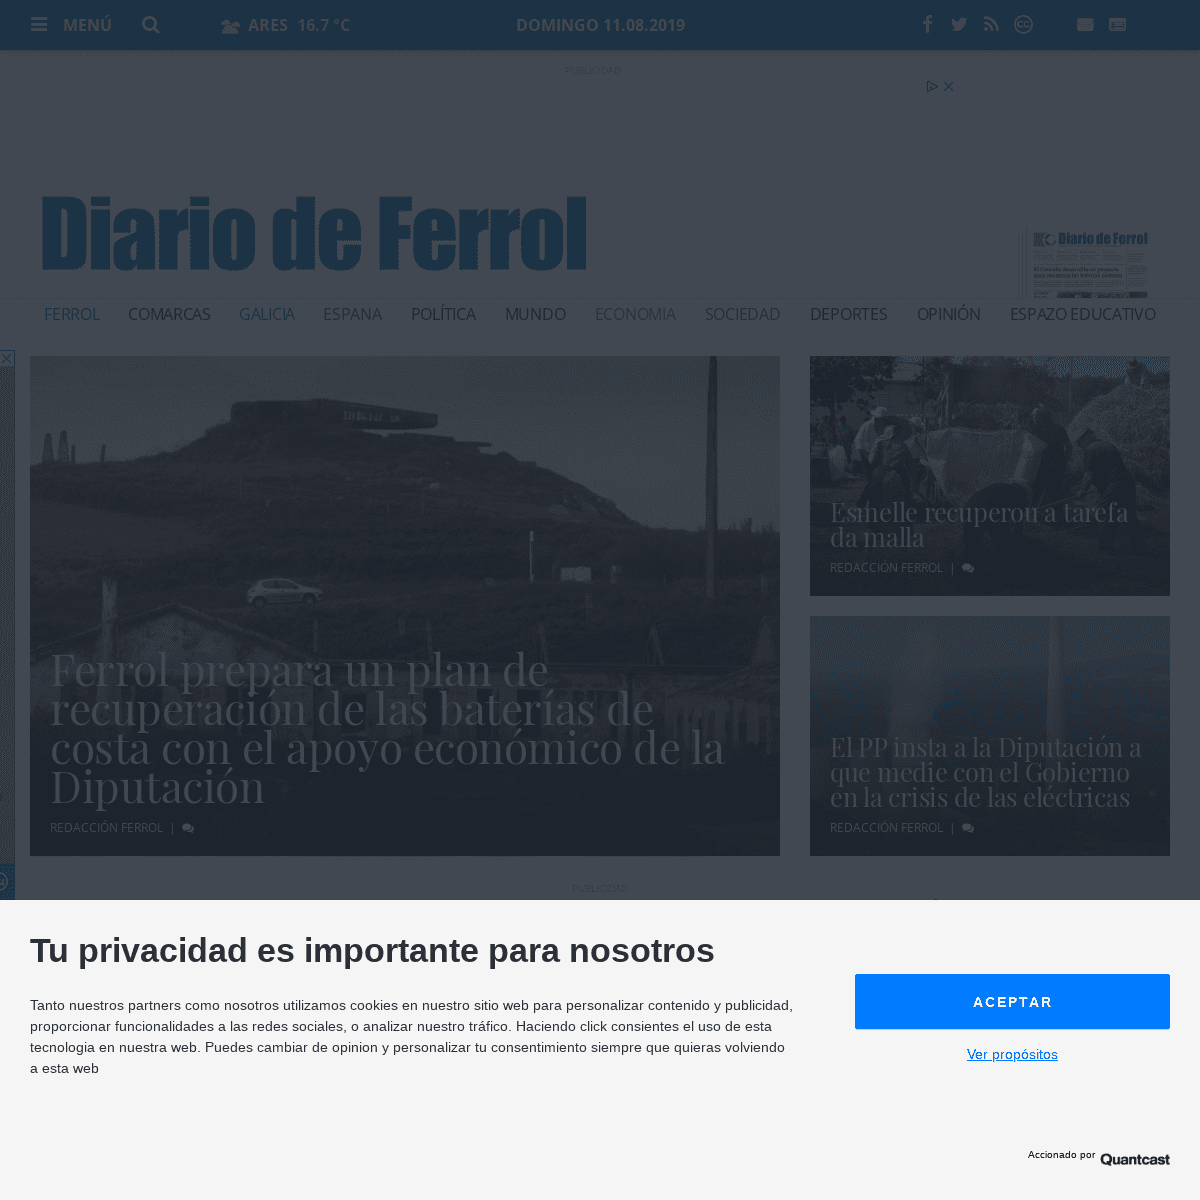 A complete backup of diariodeferrol.com